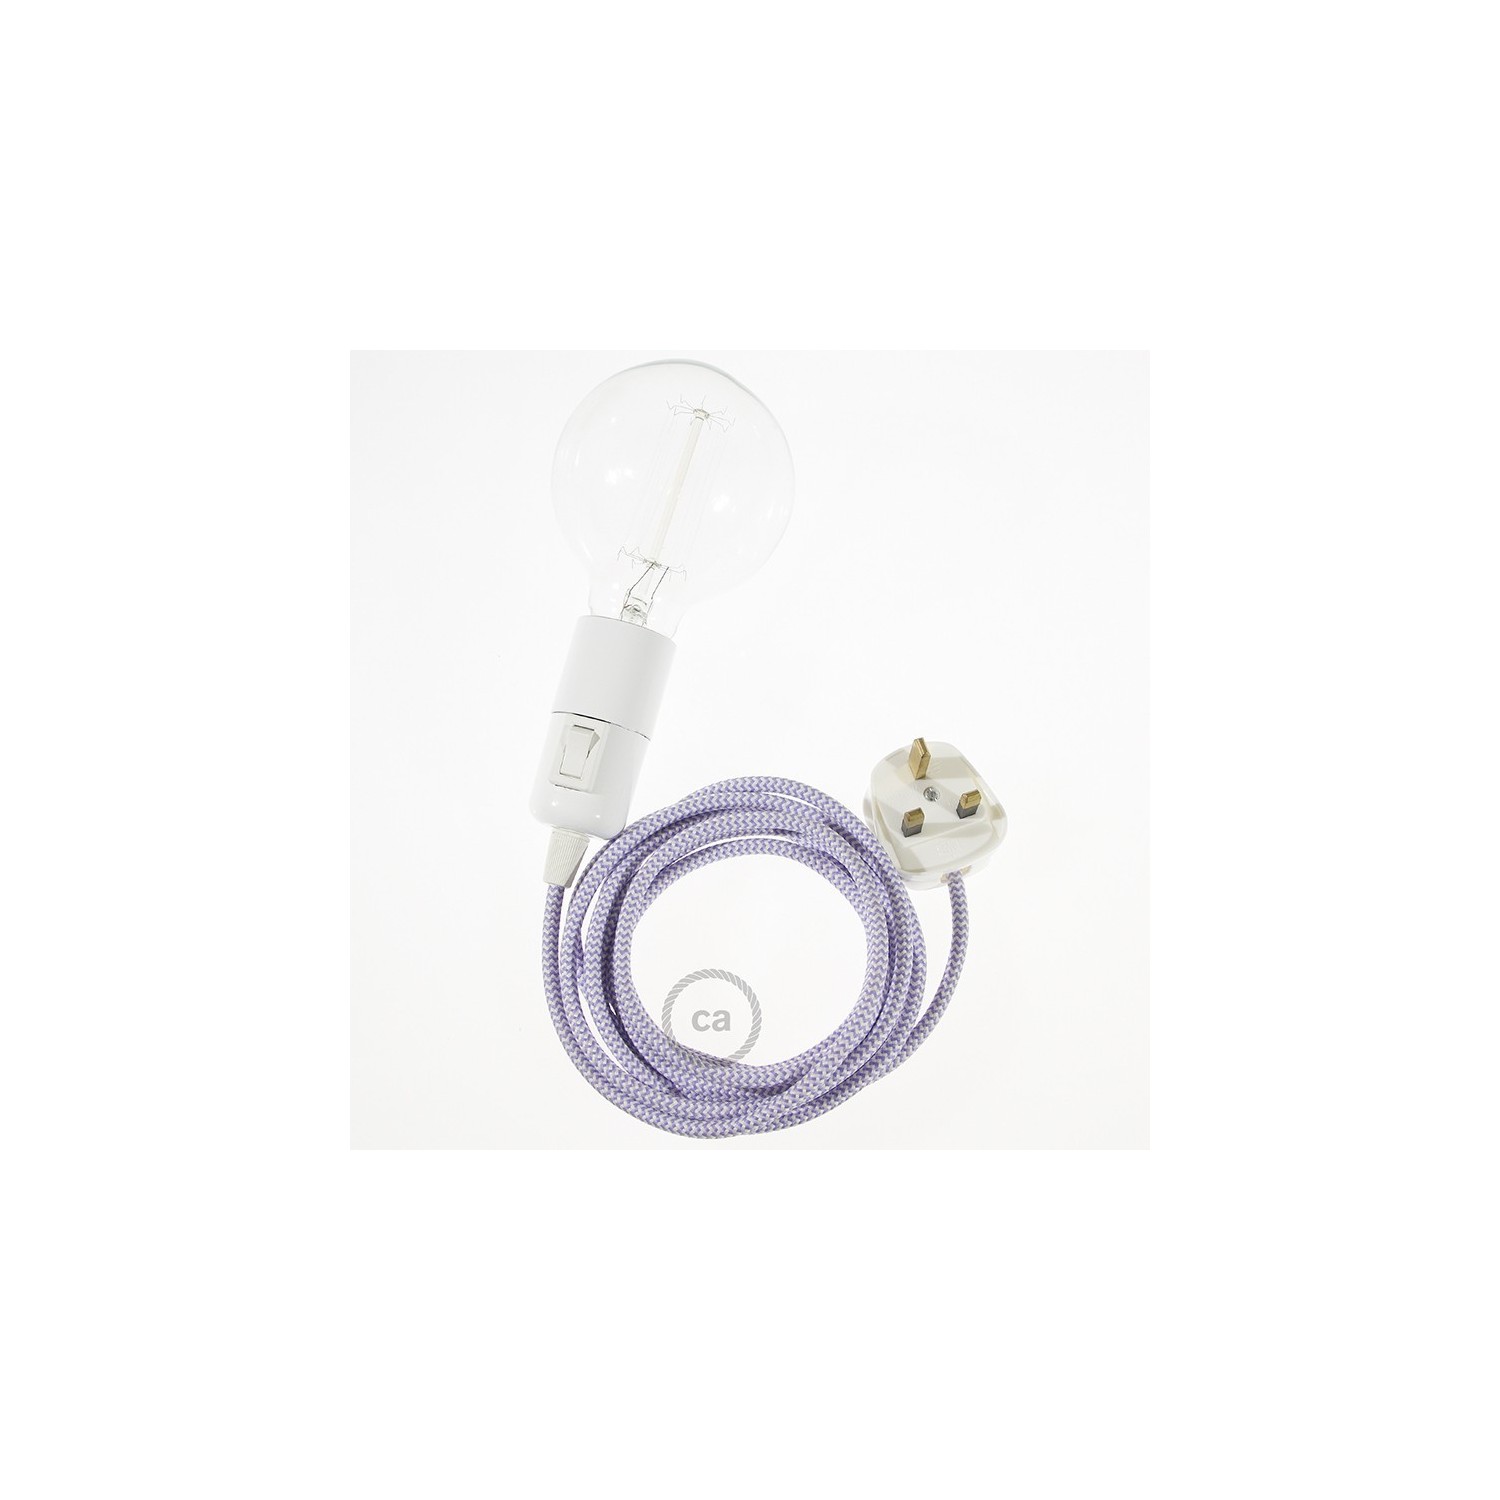 Create your RZ07 ZigZag Lilac Snake and bring the light wherever you want.